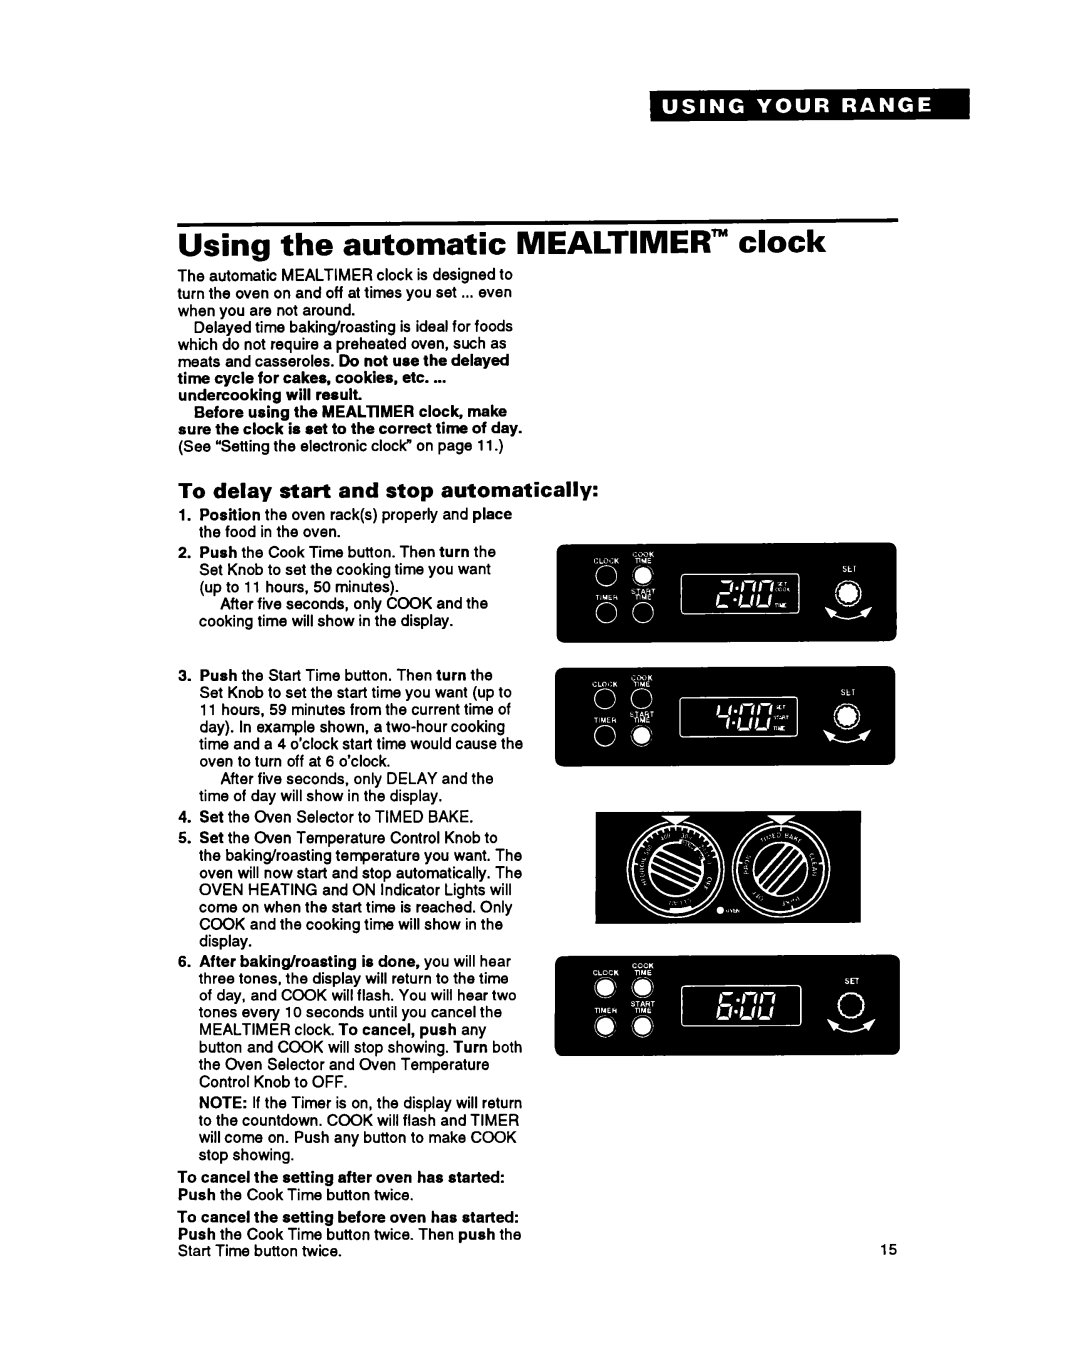 Whirlpool FES310Y manual Using the automatic MEALTIMER” clock, To delay start and stop automatically 